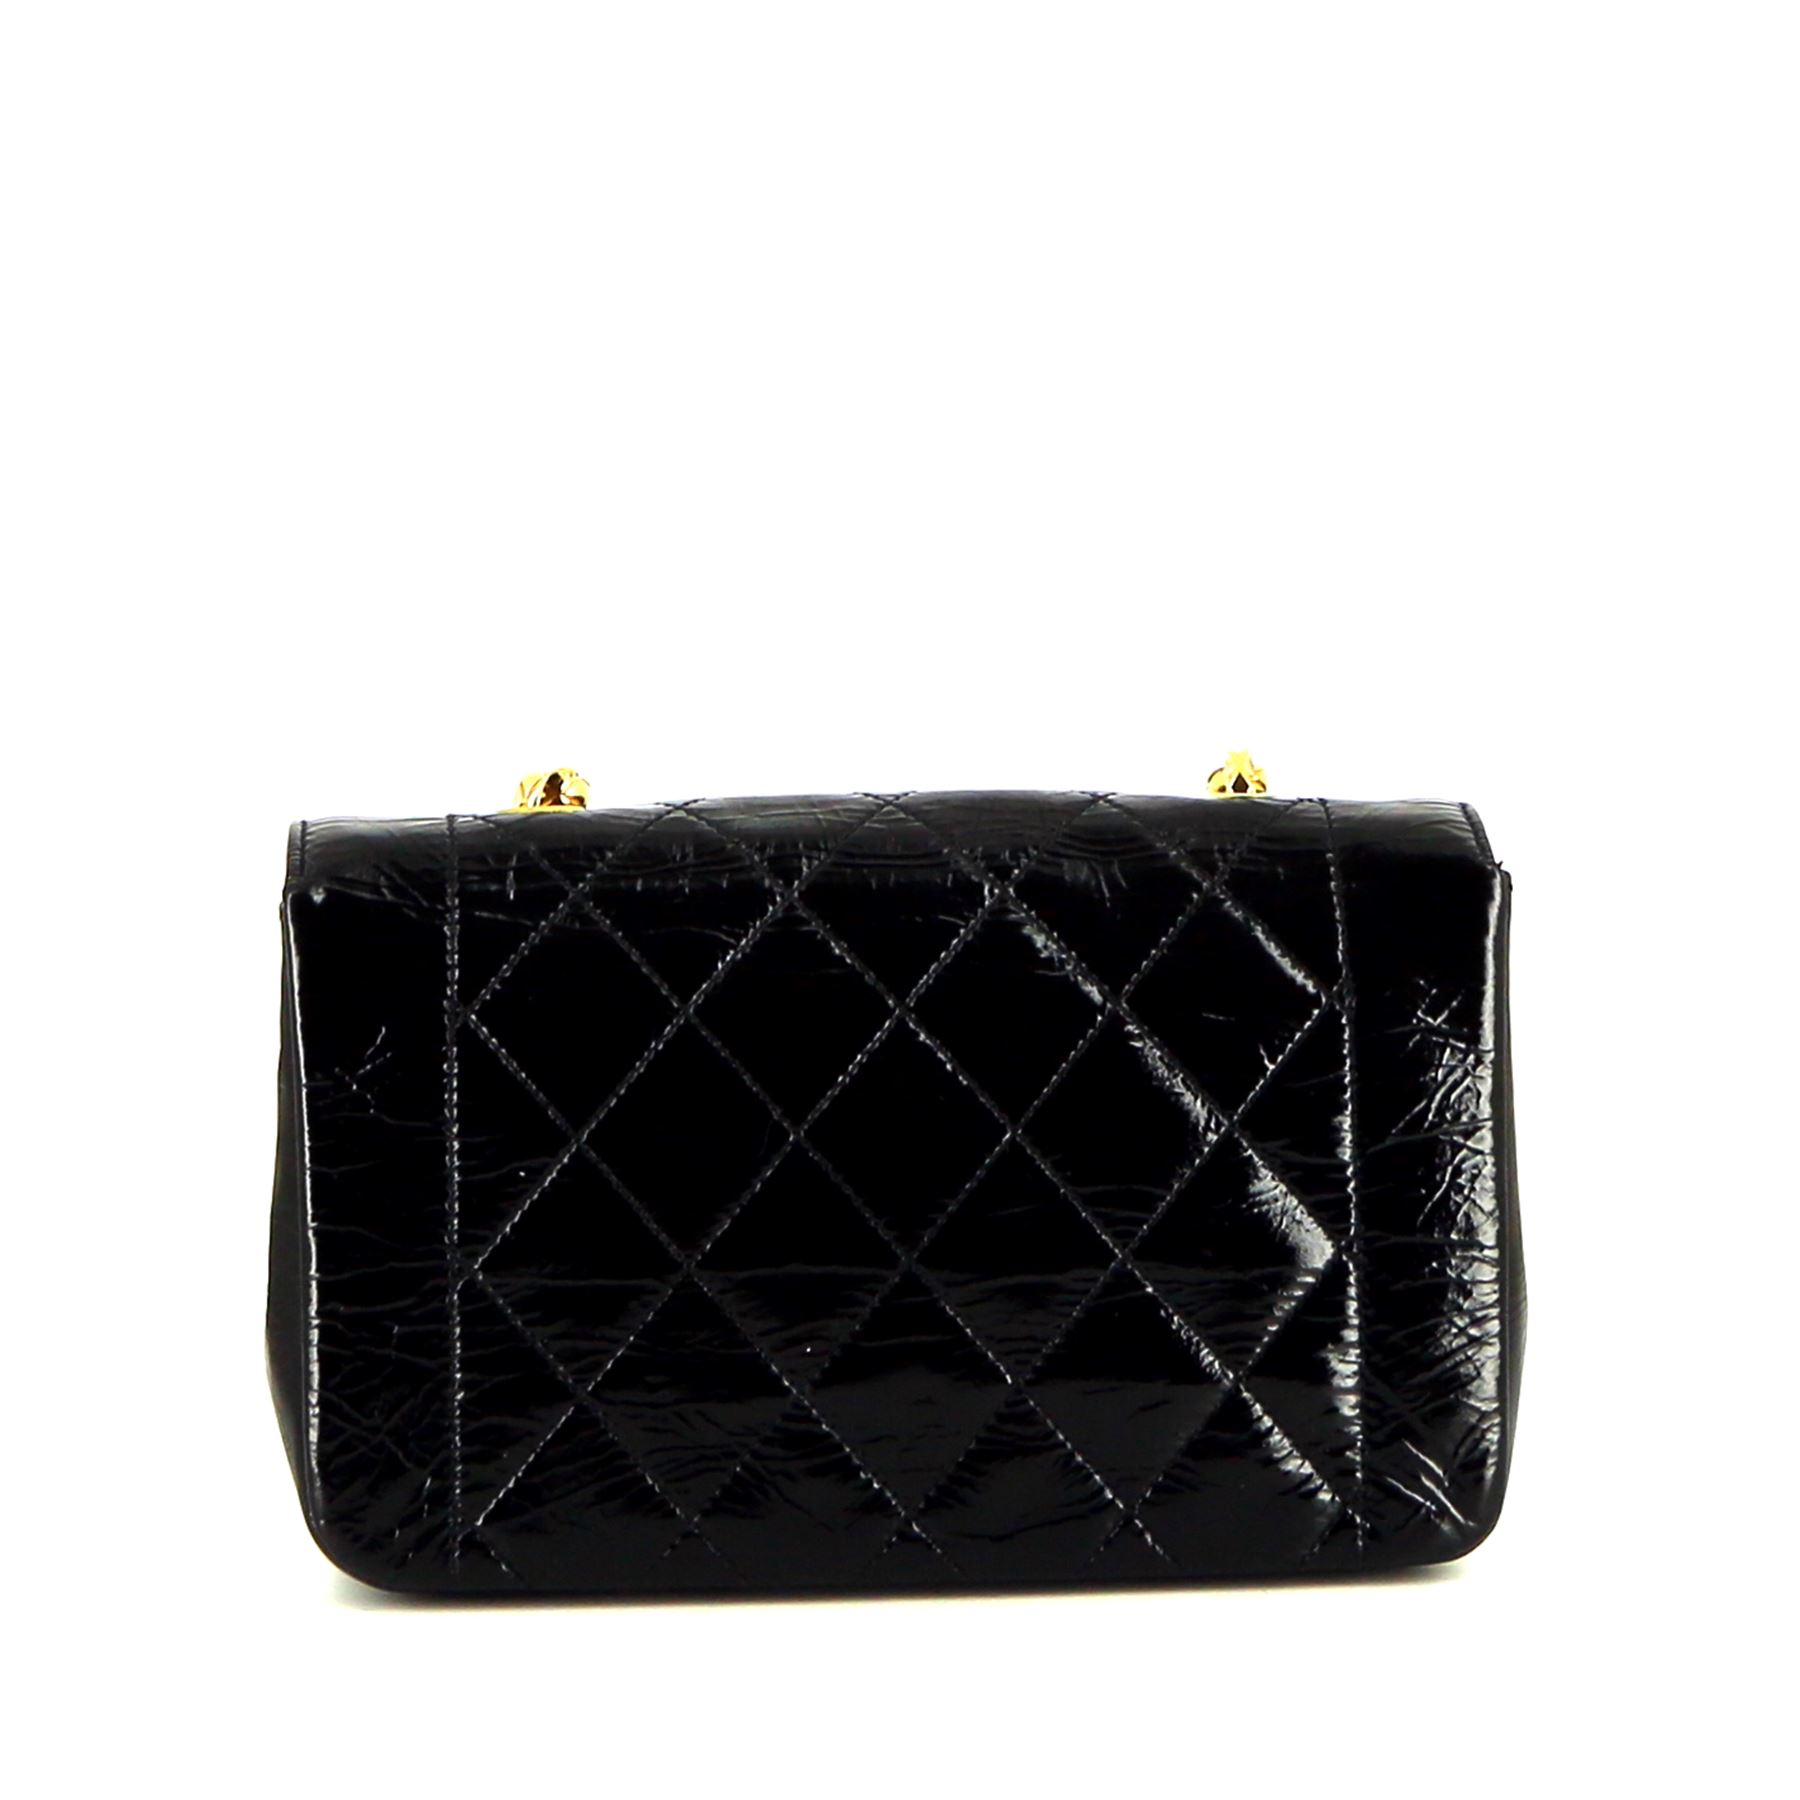 Handbag In Black Patent Quilted Leather